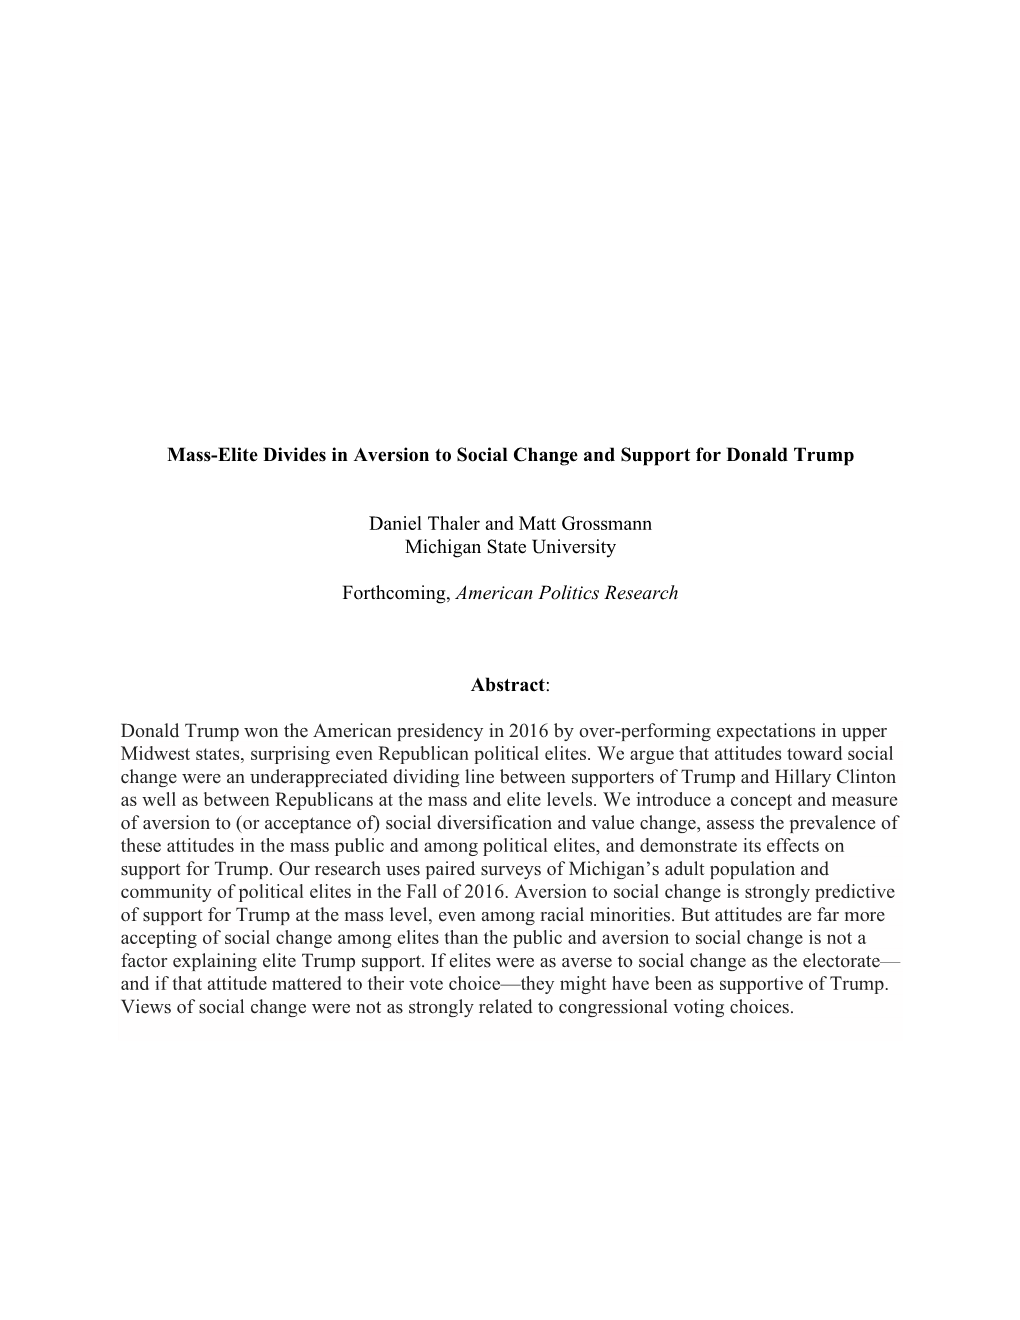 Mass-Elite Divides in Aversion to Social Change and Support for Donald Trump Daniel Thaler and Matt Grossmann Michigan State